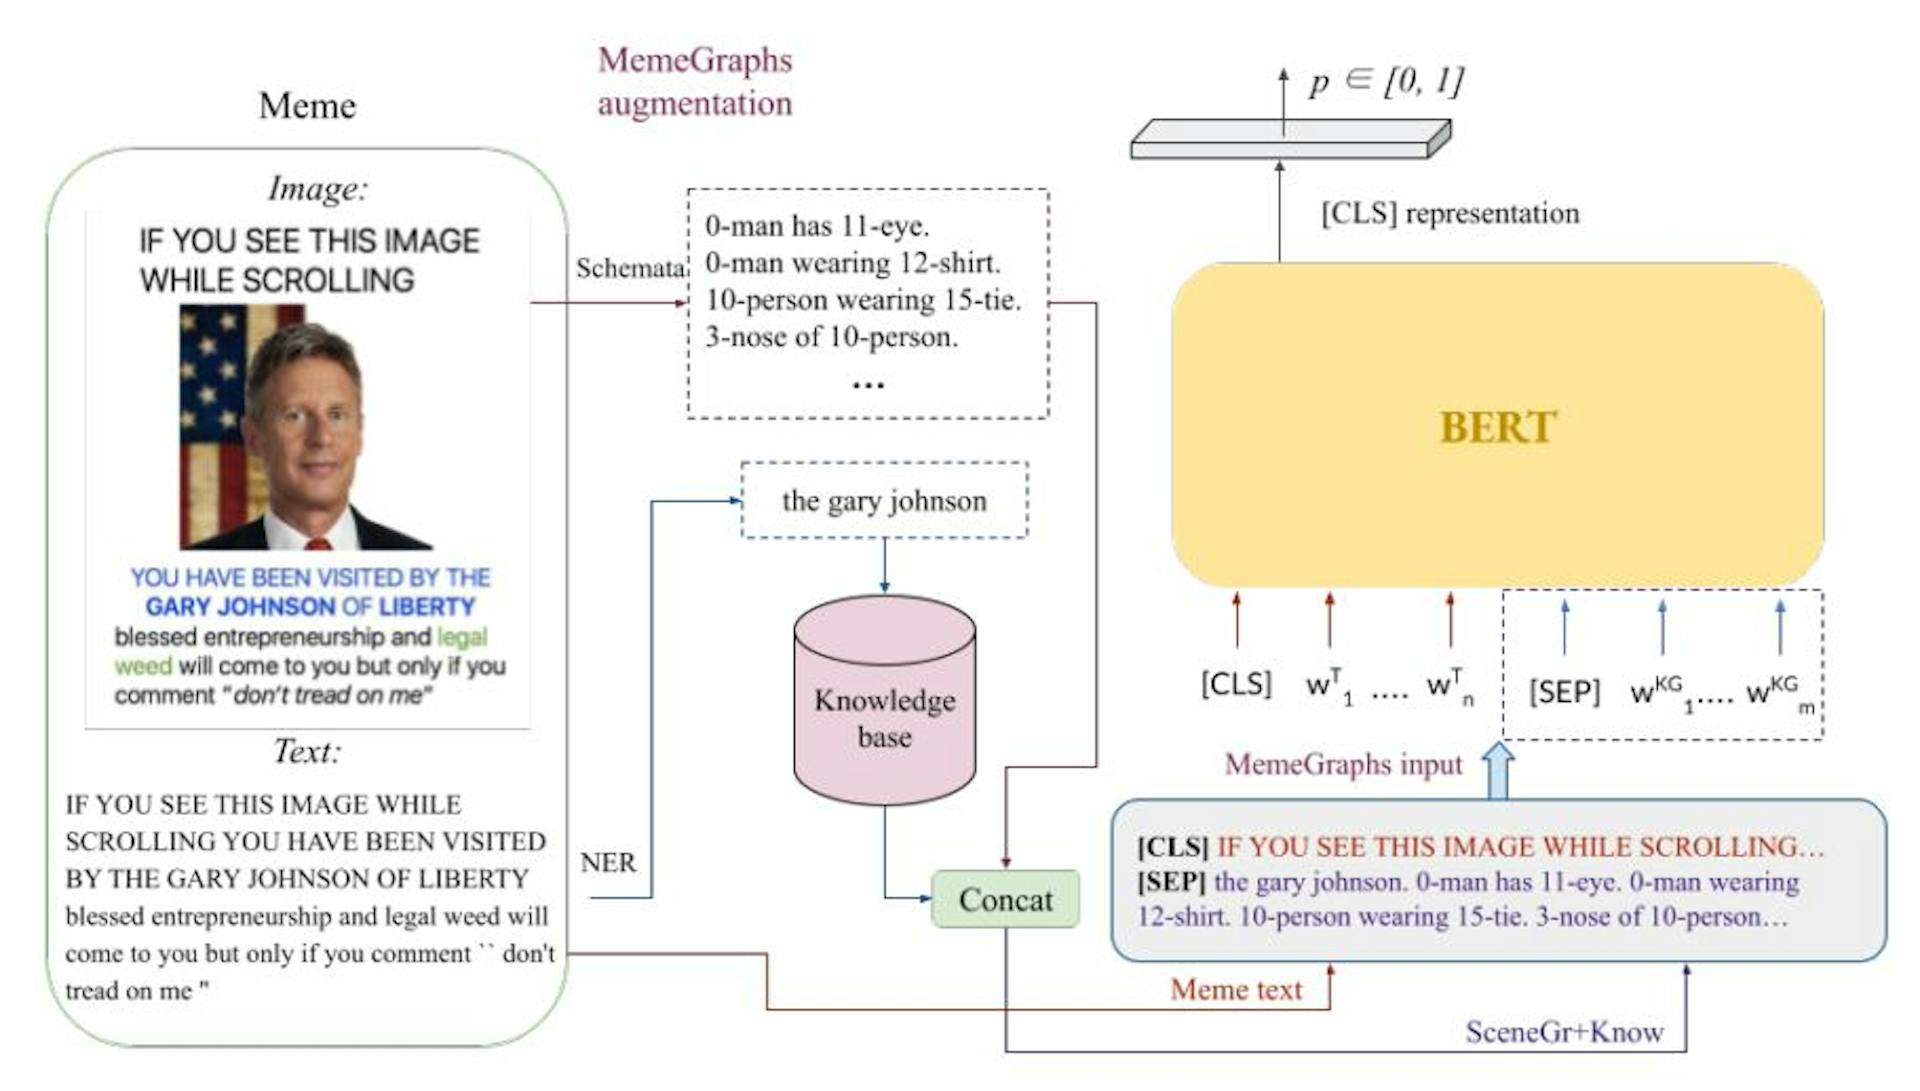 Figure 3: The architecture of MemeGraphs[SceneGr+Know]. The scene graph produced by the Schemata model and the background knowledge for each entity are concatenated and given as input to BERT after the text of the meme and the [SEP] token.